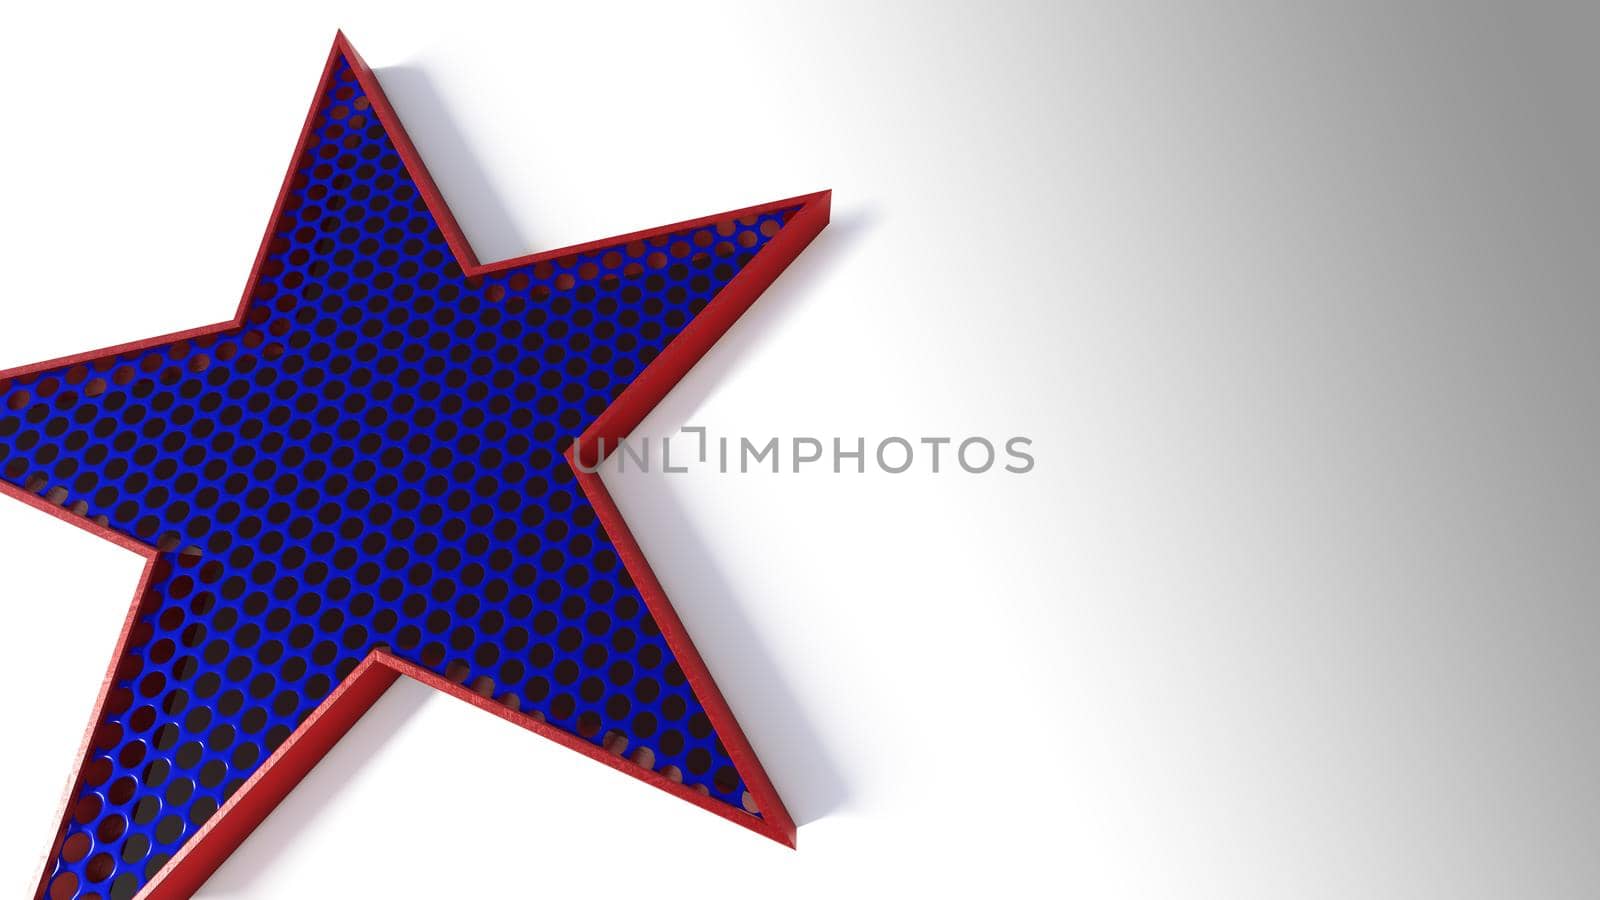 A 3d rendering image of star made from steel and wire mesh.